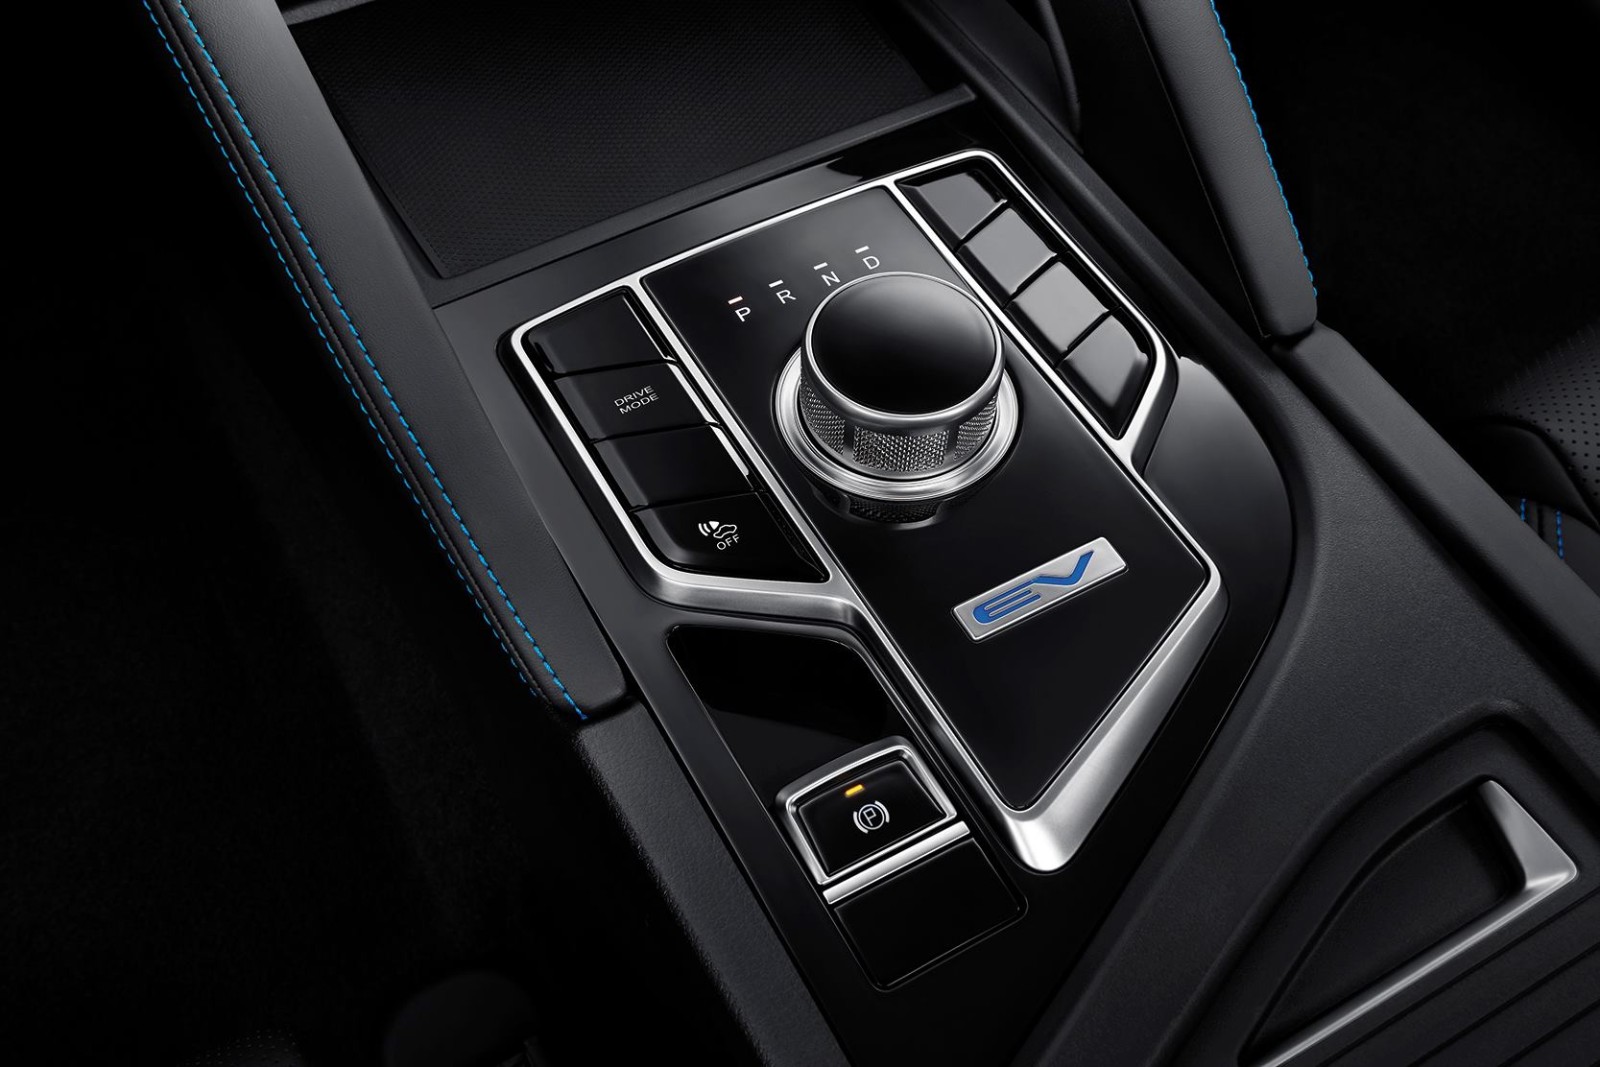 Seres 3 Centre console. Photo: Global Seres